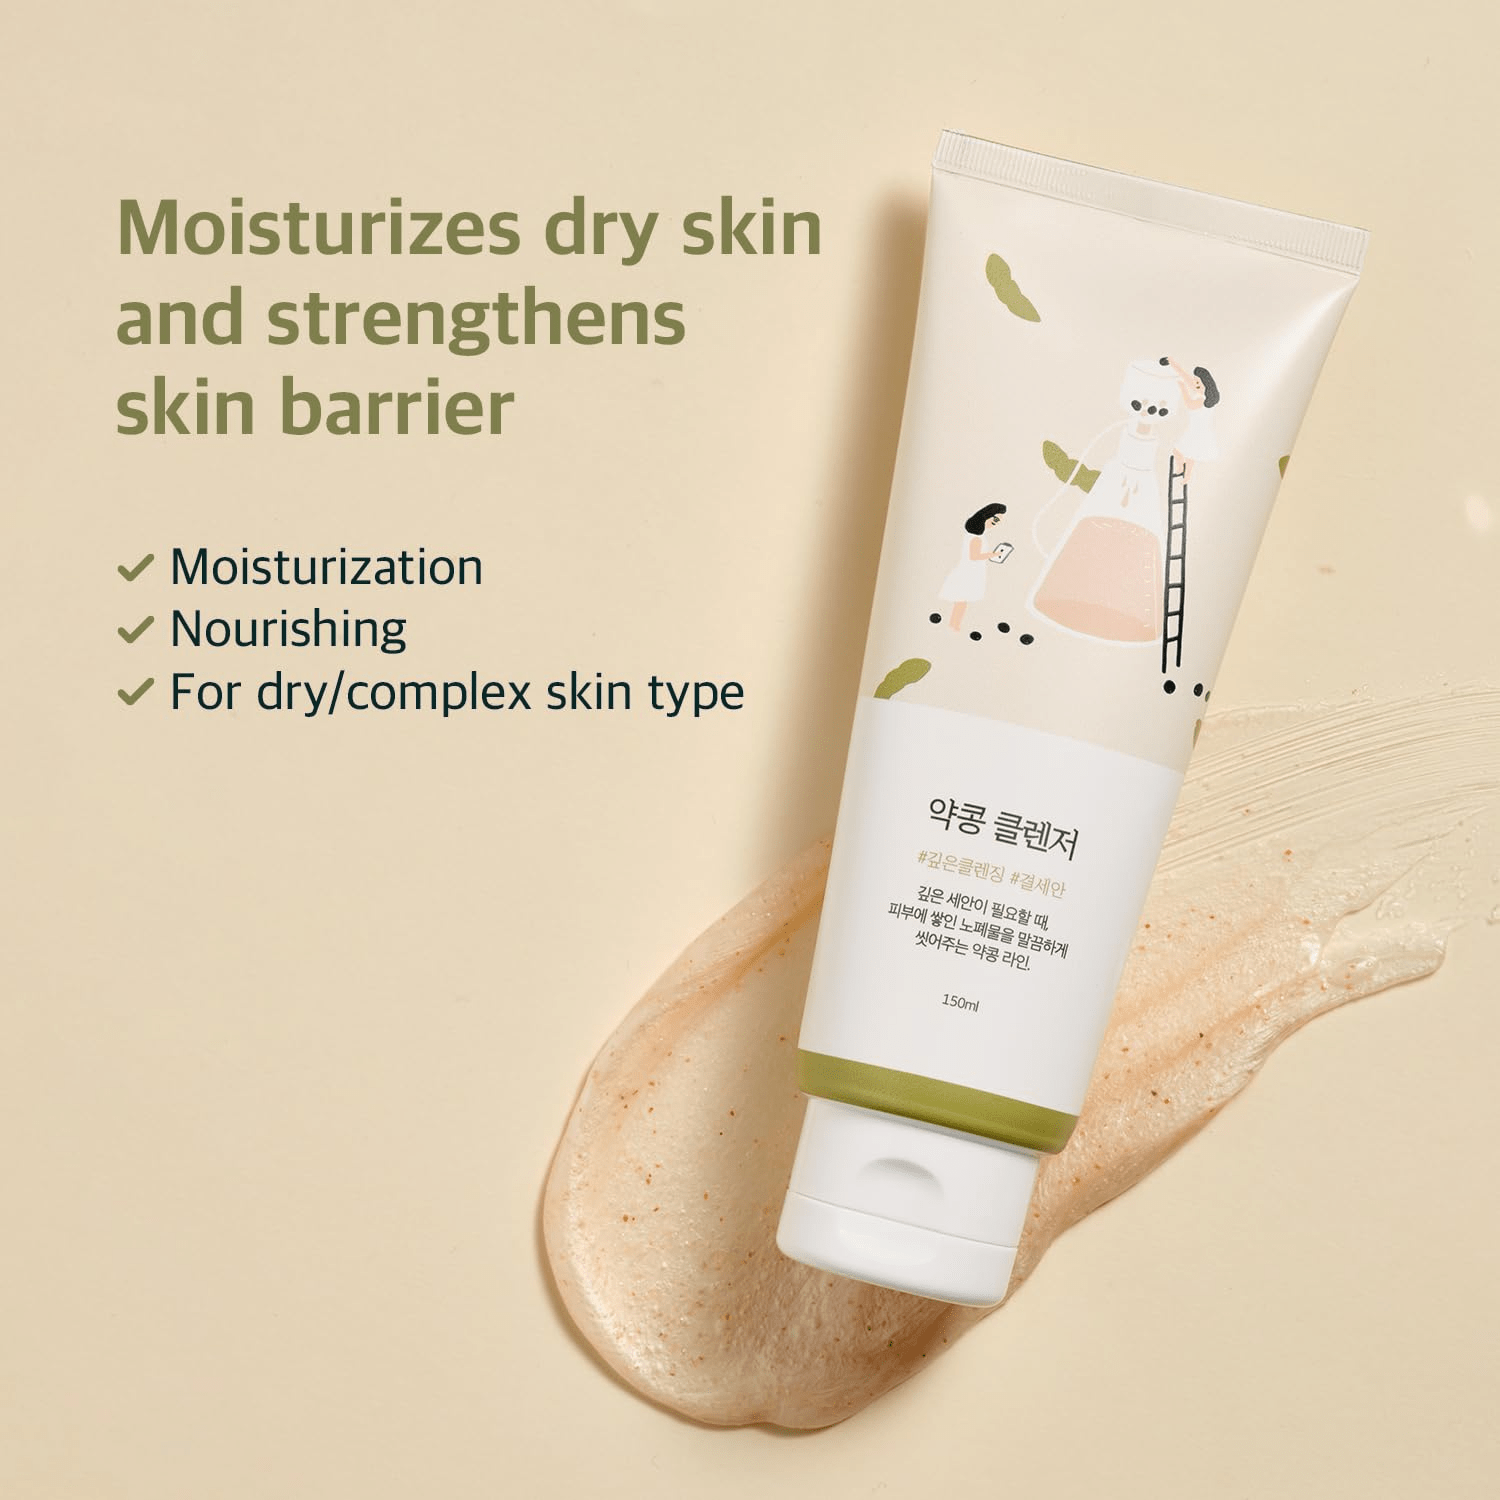 skincare-kbeauty-glowtime-round lab soybean nourishing cleanser